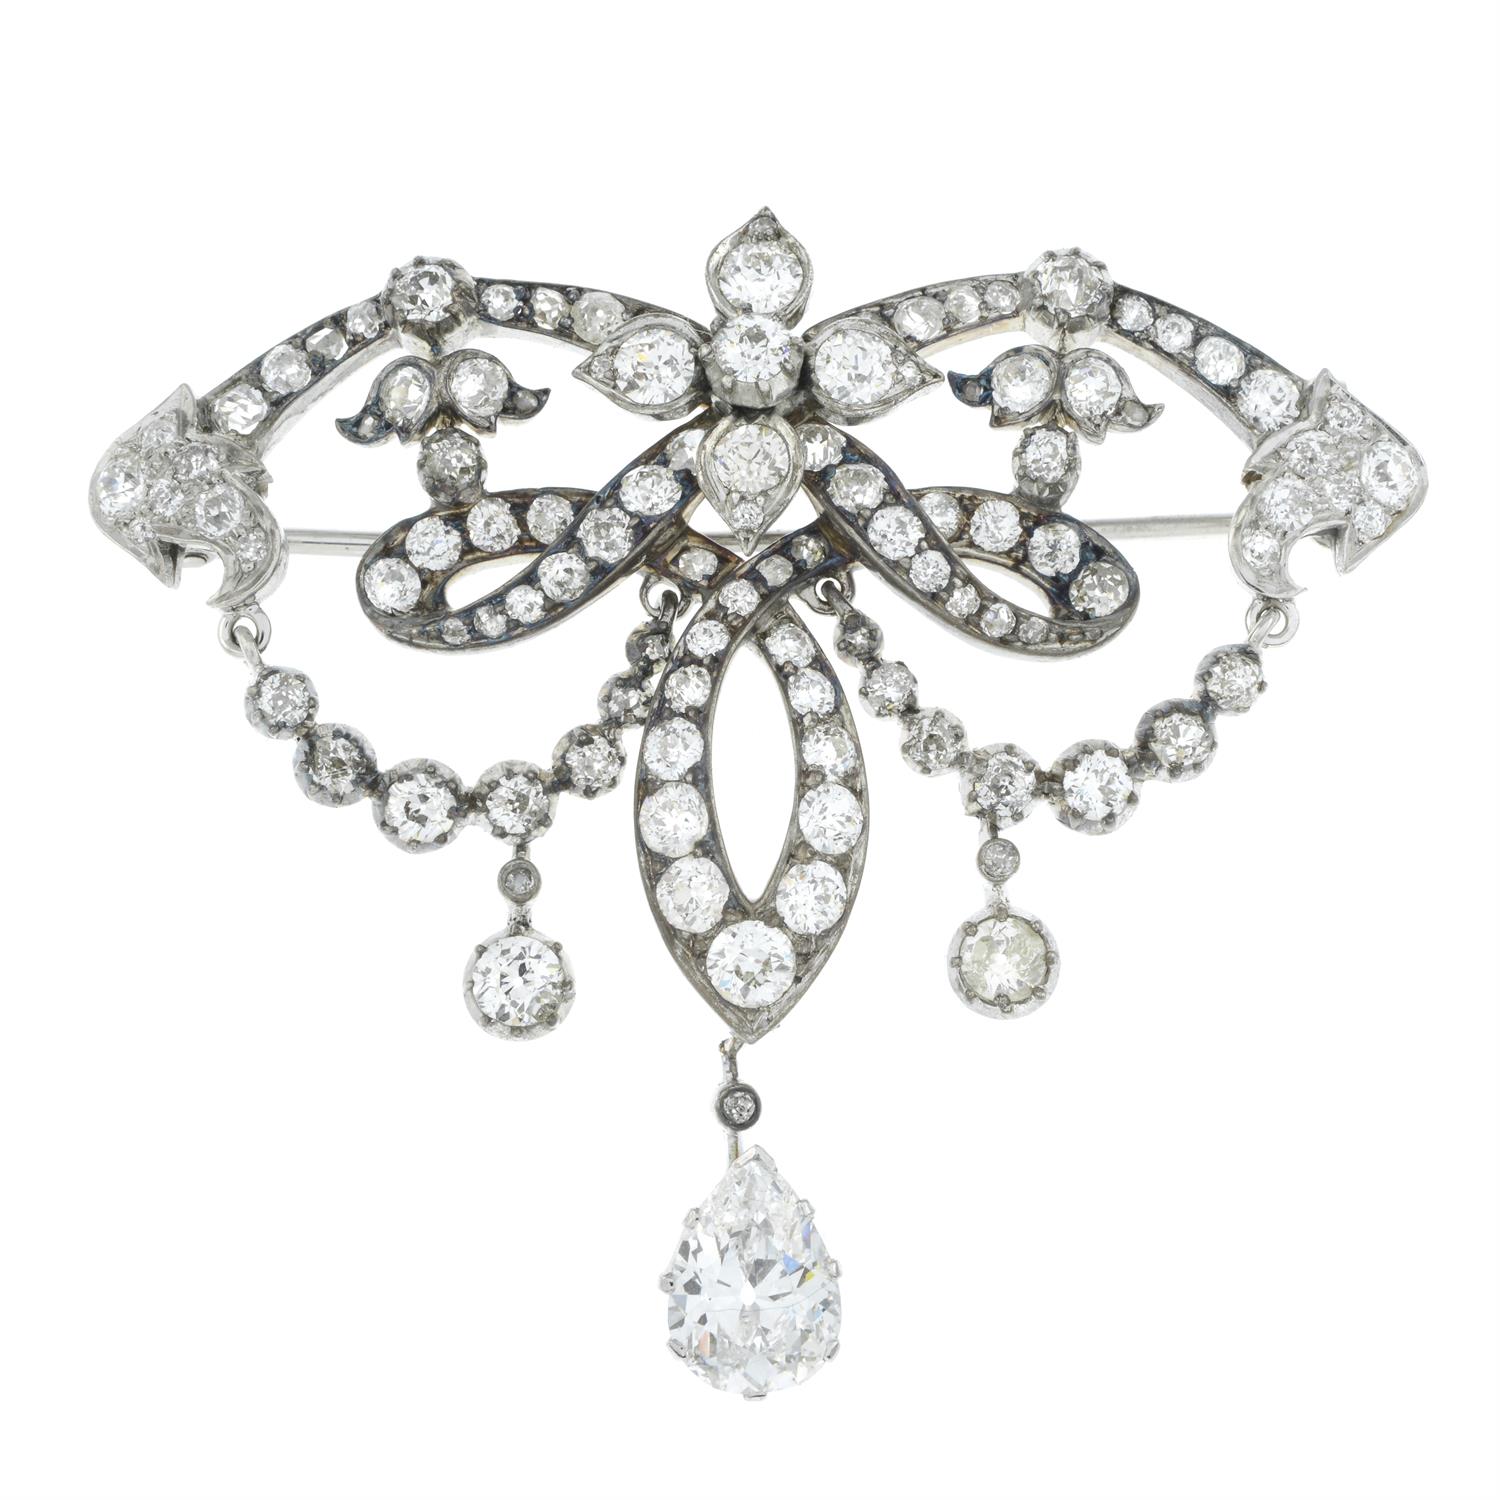 19th century silver and gold diamond brooch - Image 2 of 4